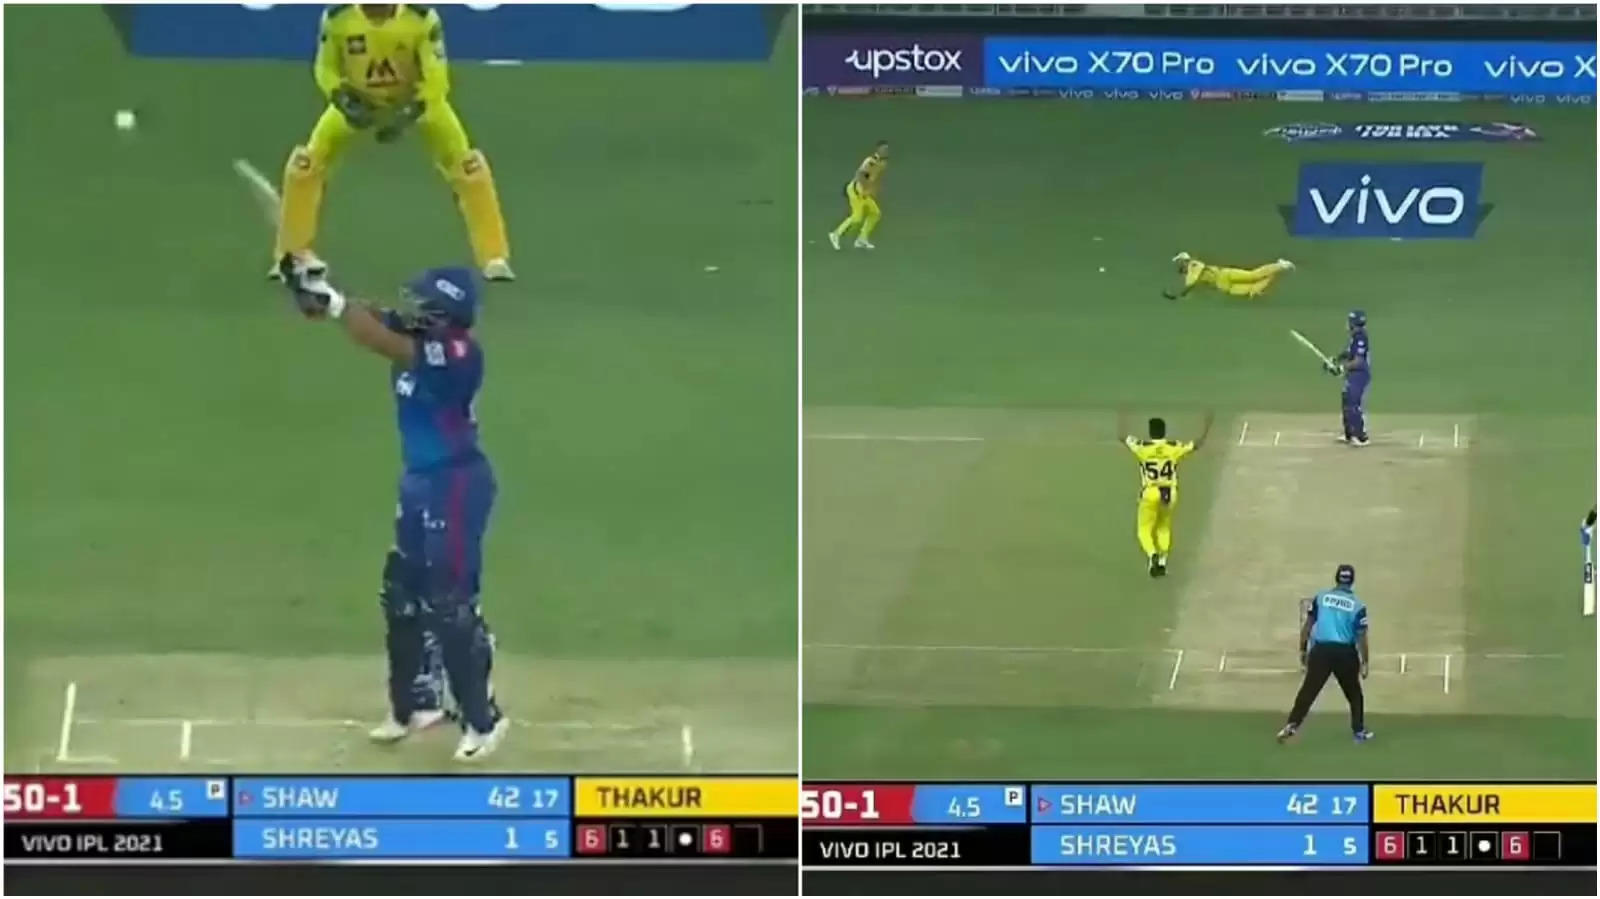 WATCH: Shardul Thakur outsmarts Prithvi Shaw with slower ball, but Dhoni drops the catch